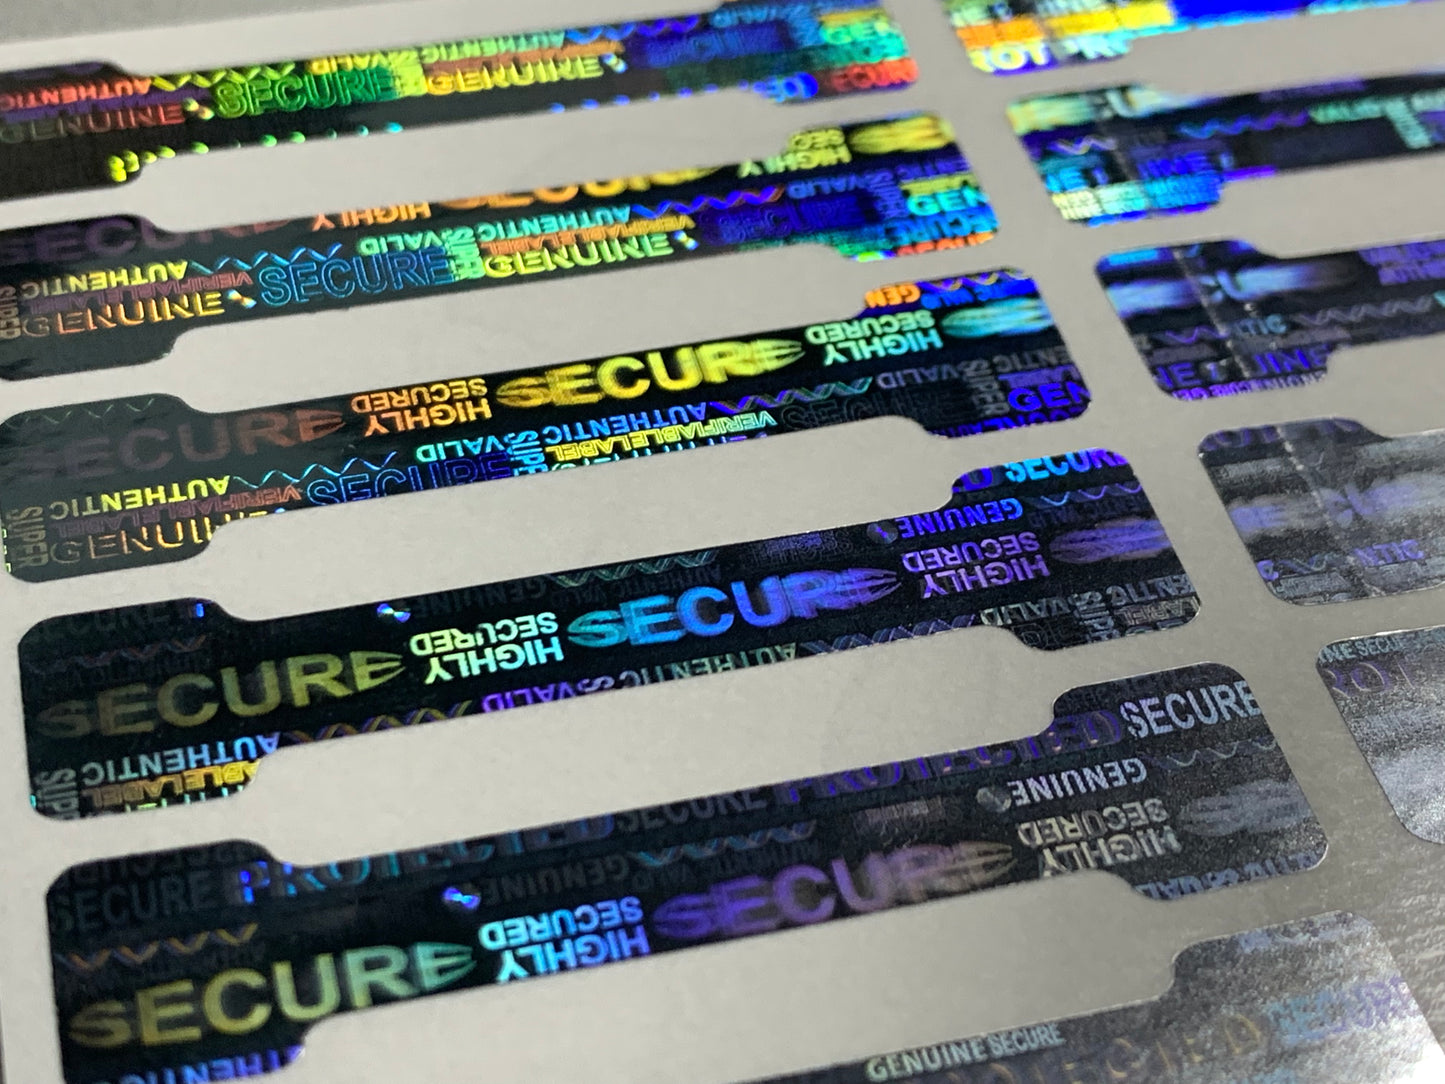 SHH-3039DB, Dog Bone Security Hologram Stickers Void if Removed Protective Tamper Evident Dogbone, 300/1,800/12,000